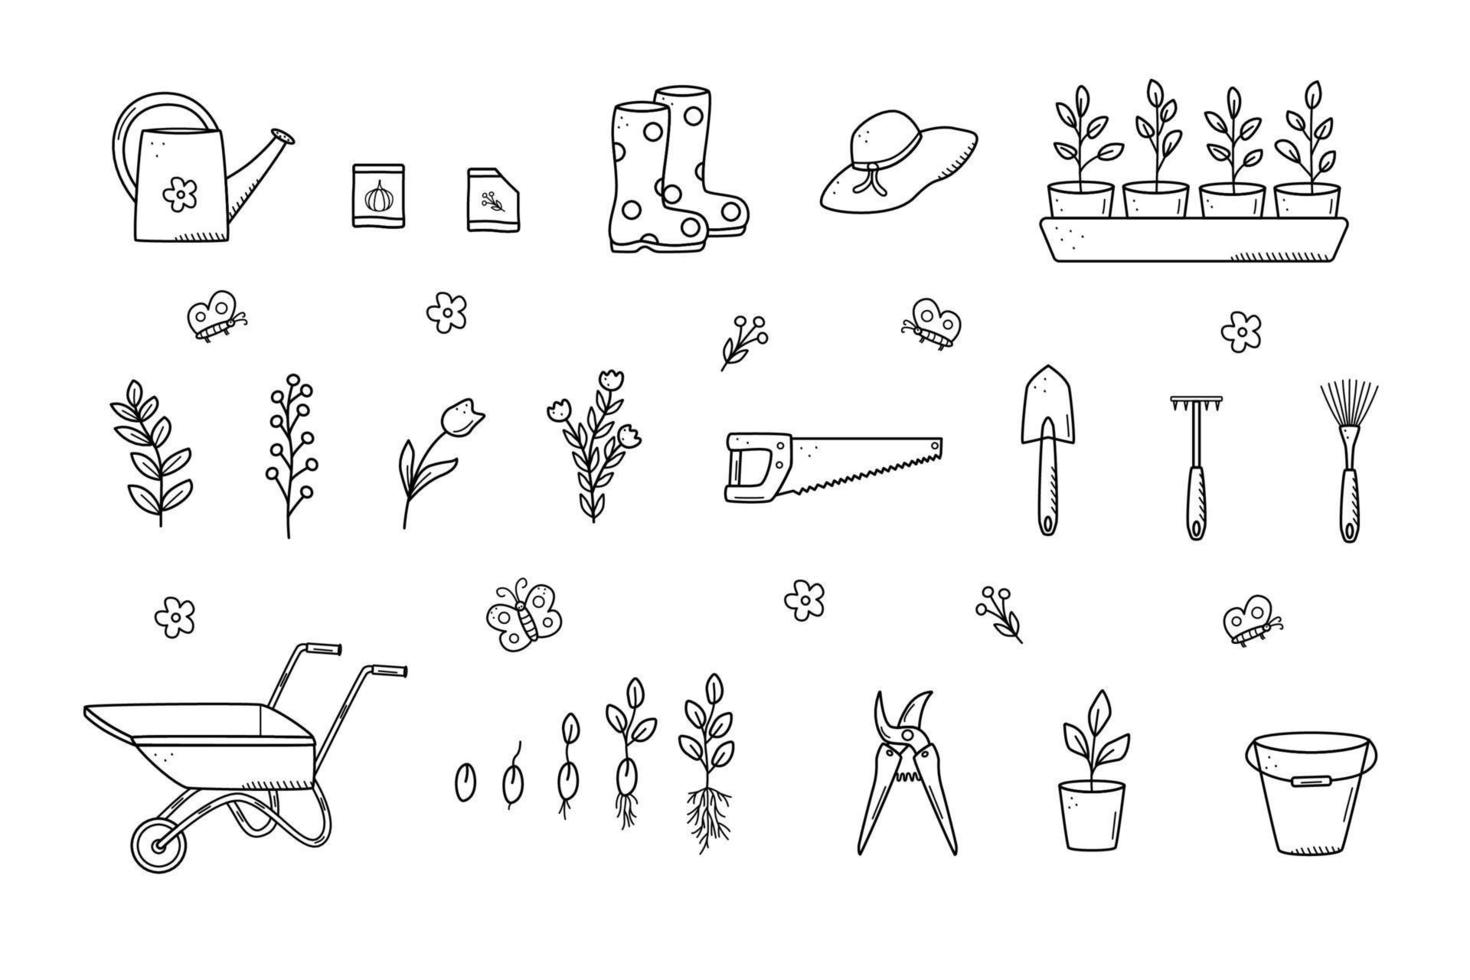 Garden tools and plants, a set of vector doodle illustrations. Concept gardening, a summer hobby.